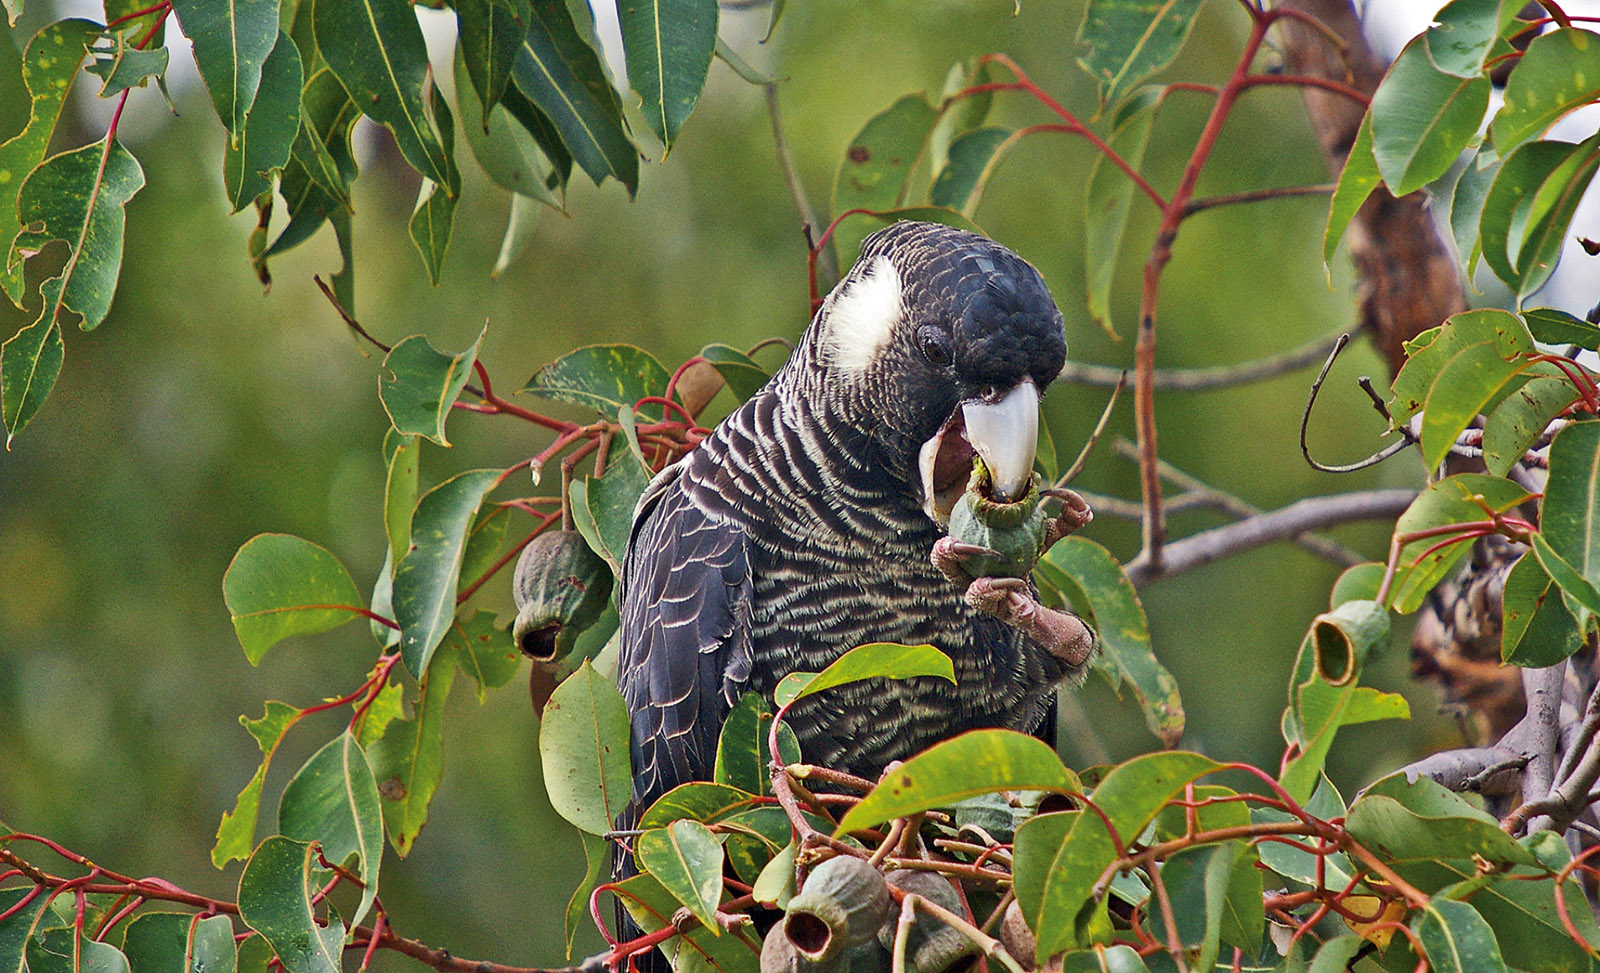 A Baudin’s black cockatoo, whose main food is marri seeds; its elongated mandible is specially adapted to scoop the seeds out of marri nuts